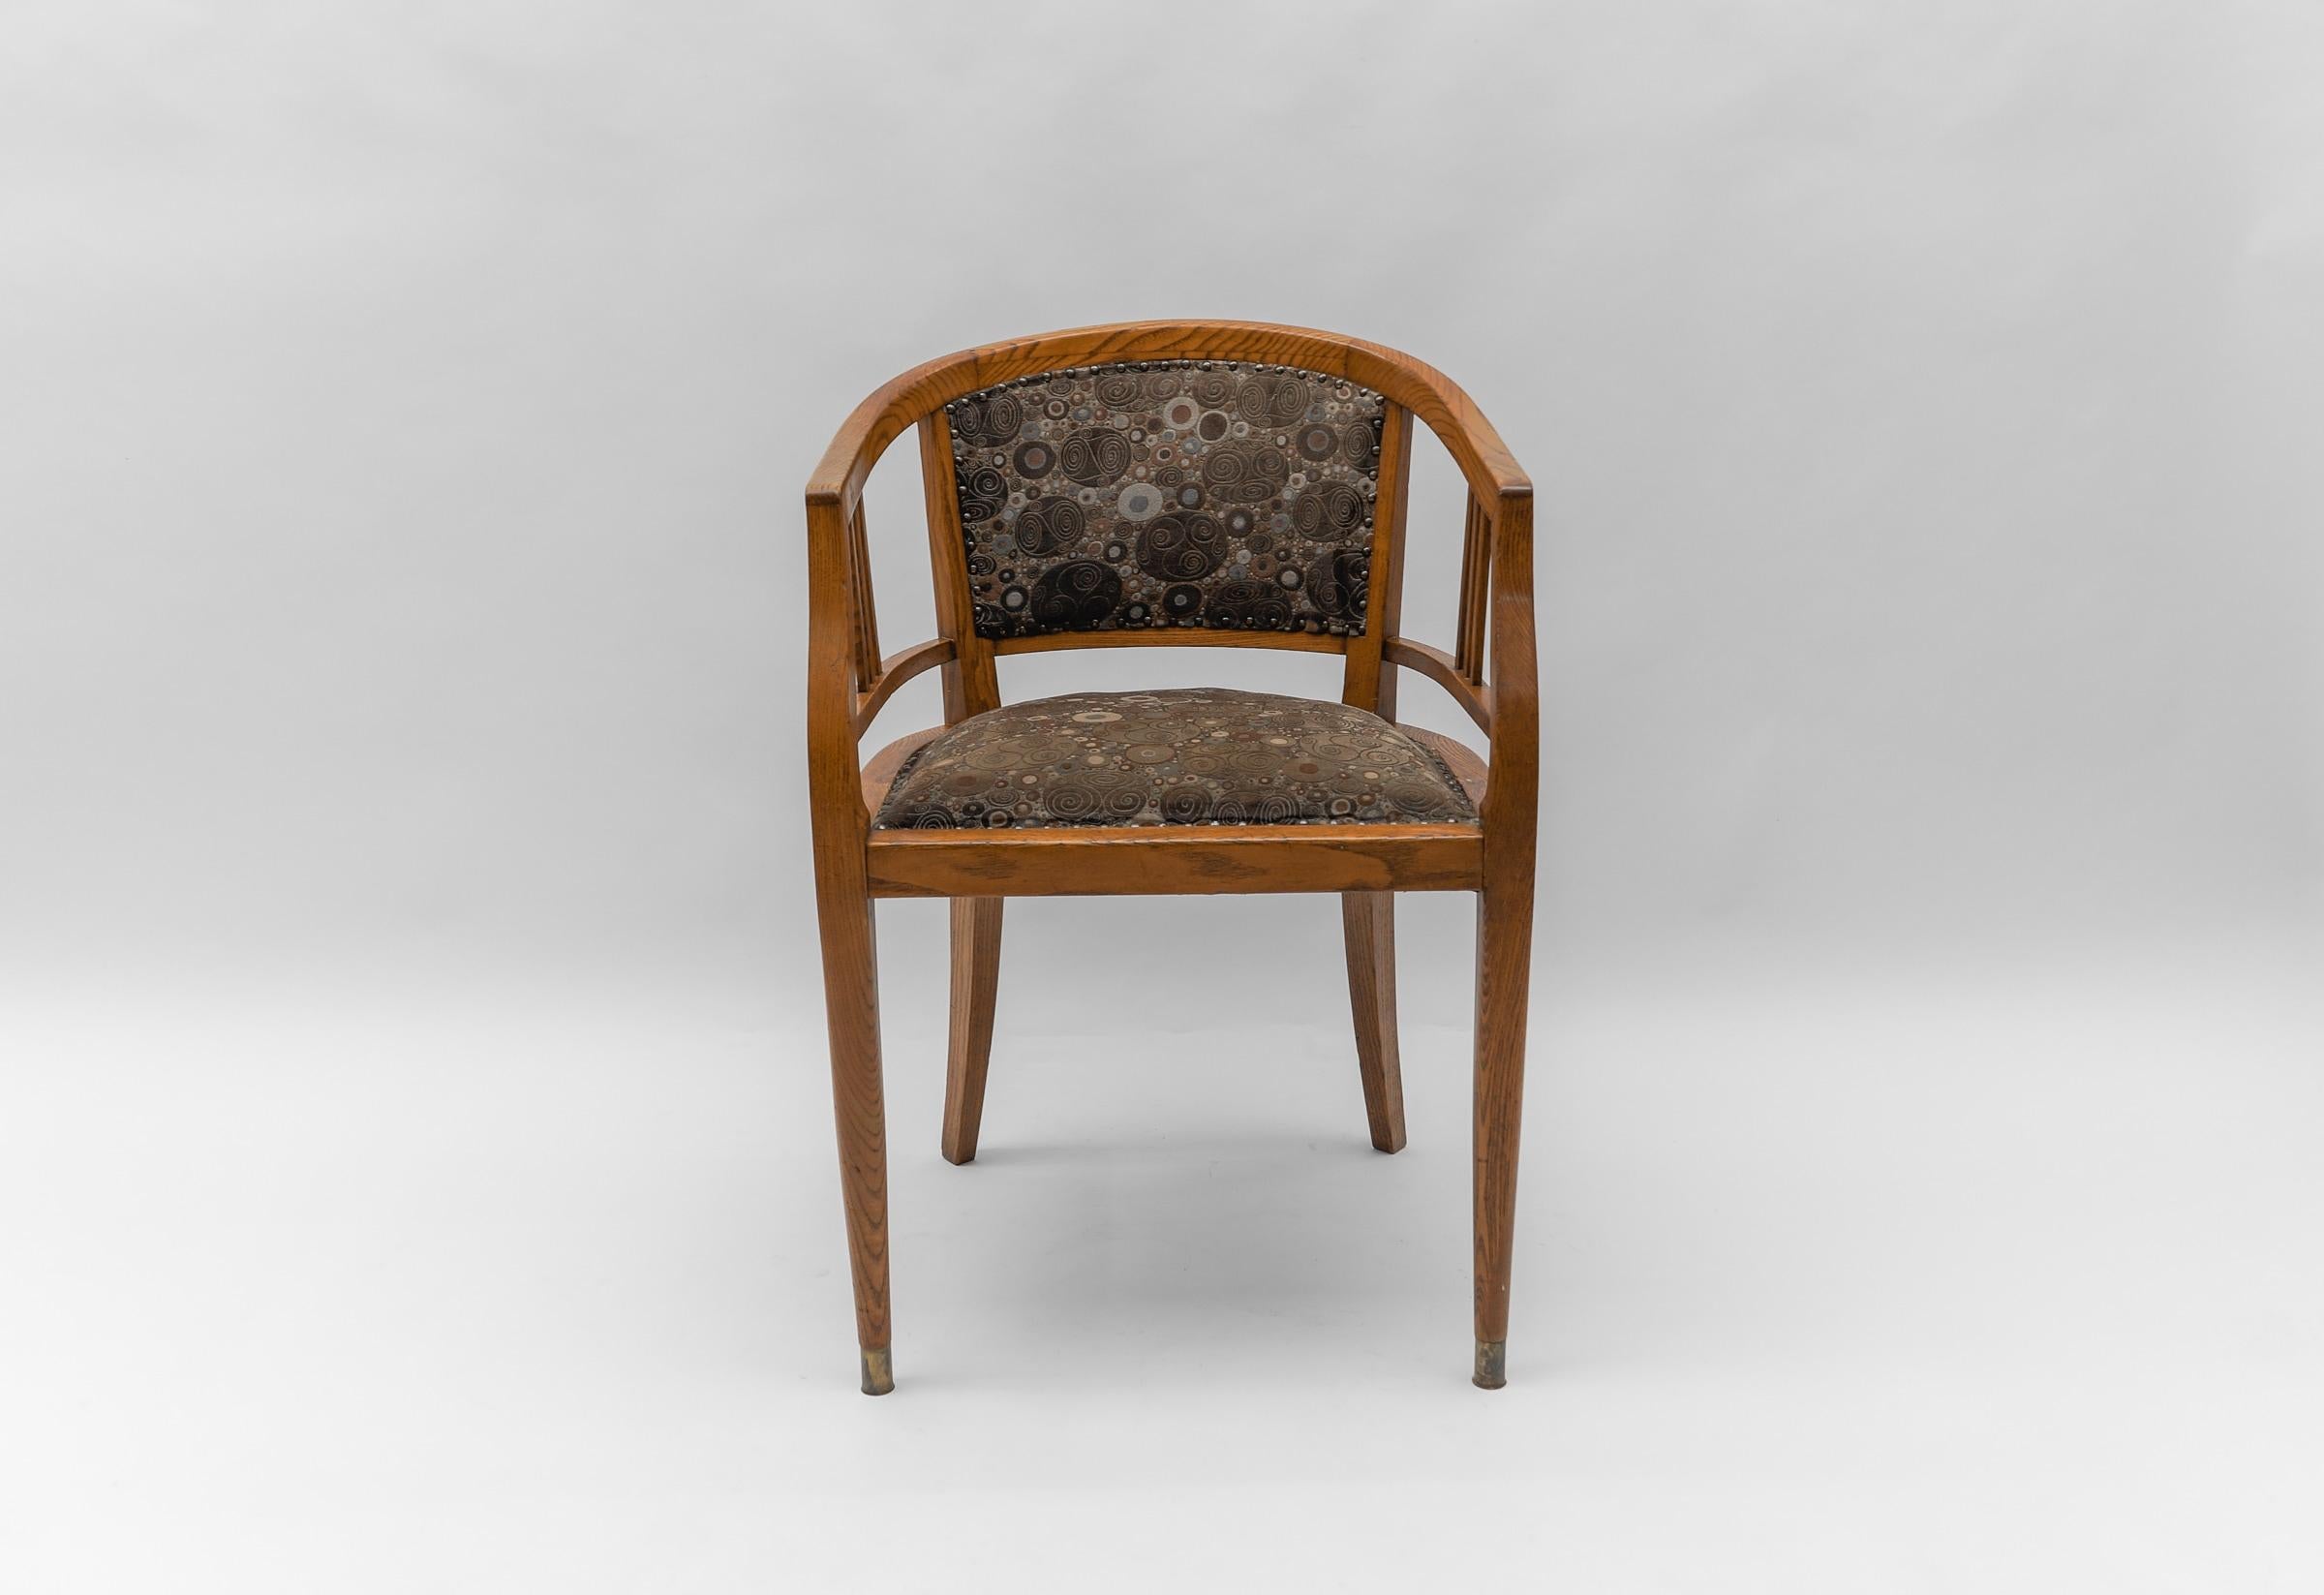 Art Deco Armchair with Gustav Klimt Upholstery Fabric, 1930s Austria In Good Condition For Sale In Nürnberg, Bayern